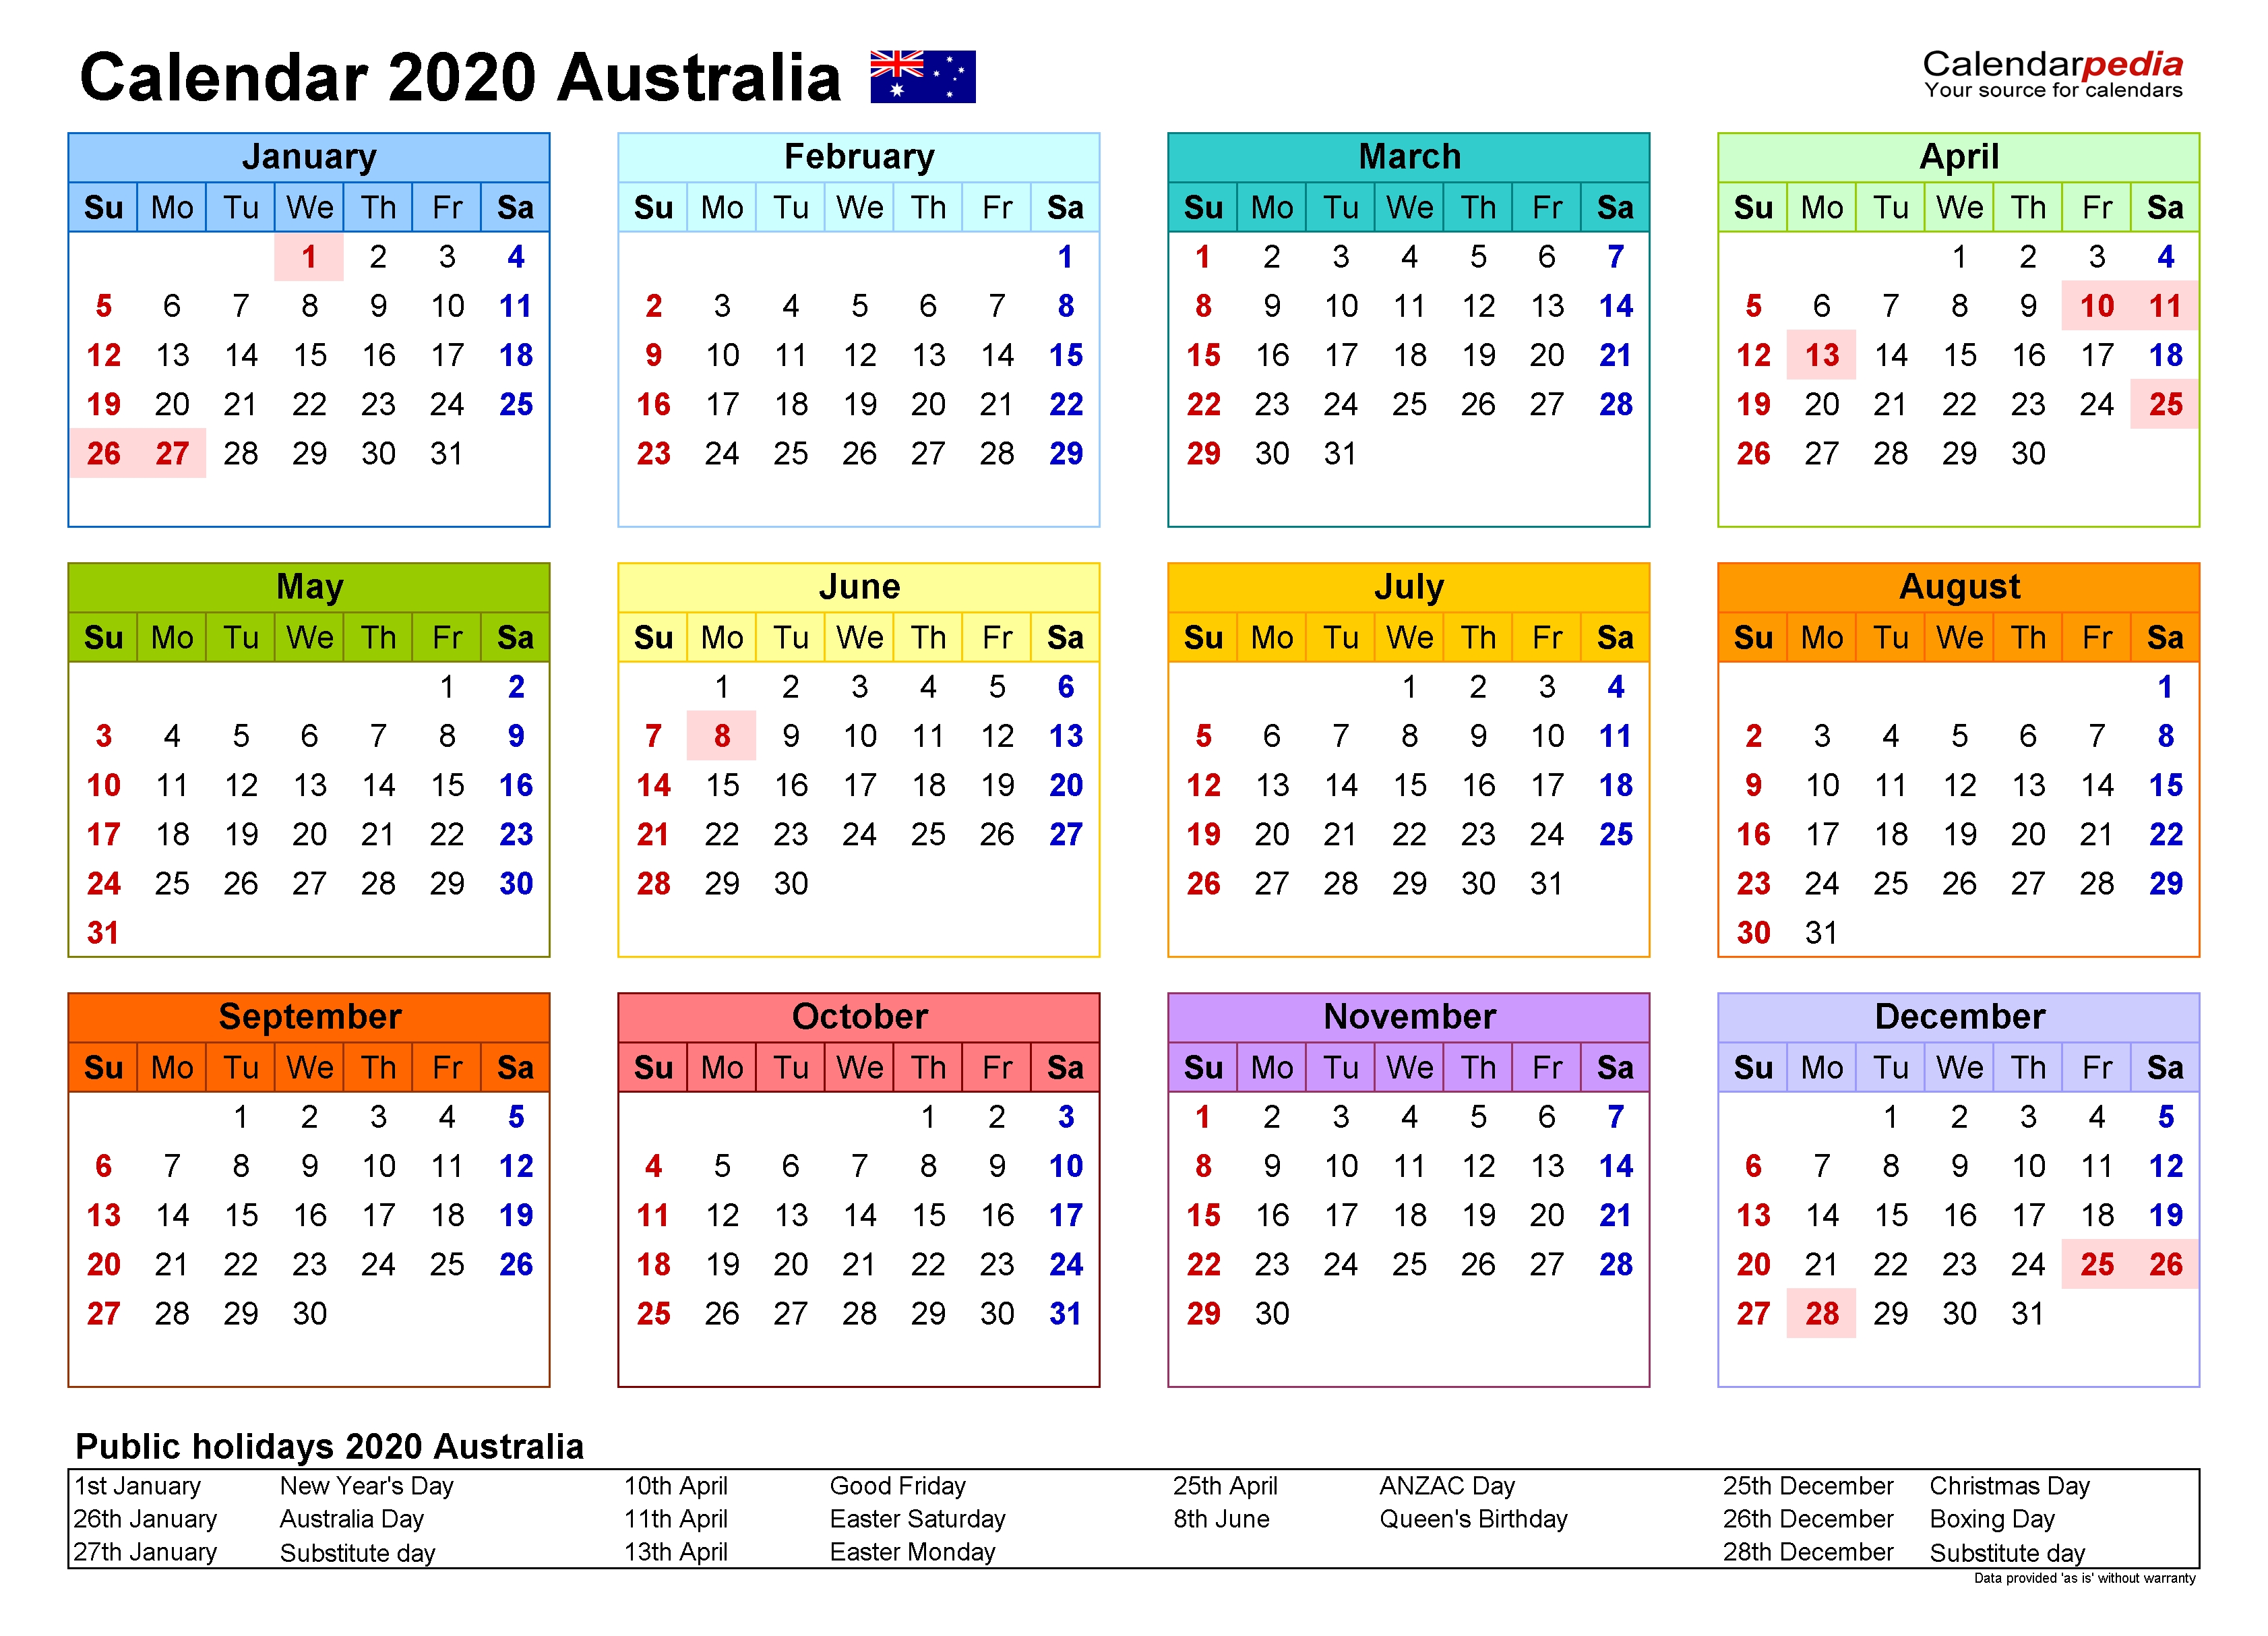 Australia Calendar 2020 - Free Printable Excel Templates  What Australian Financial Year Are We In Currently